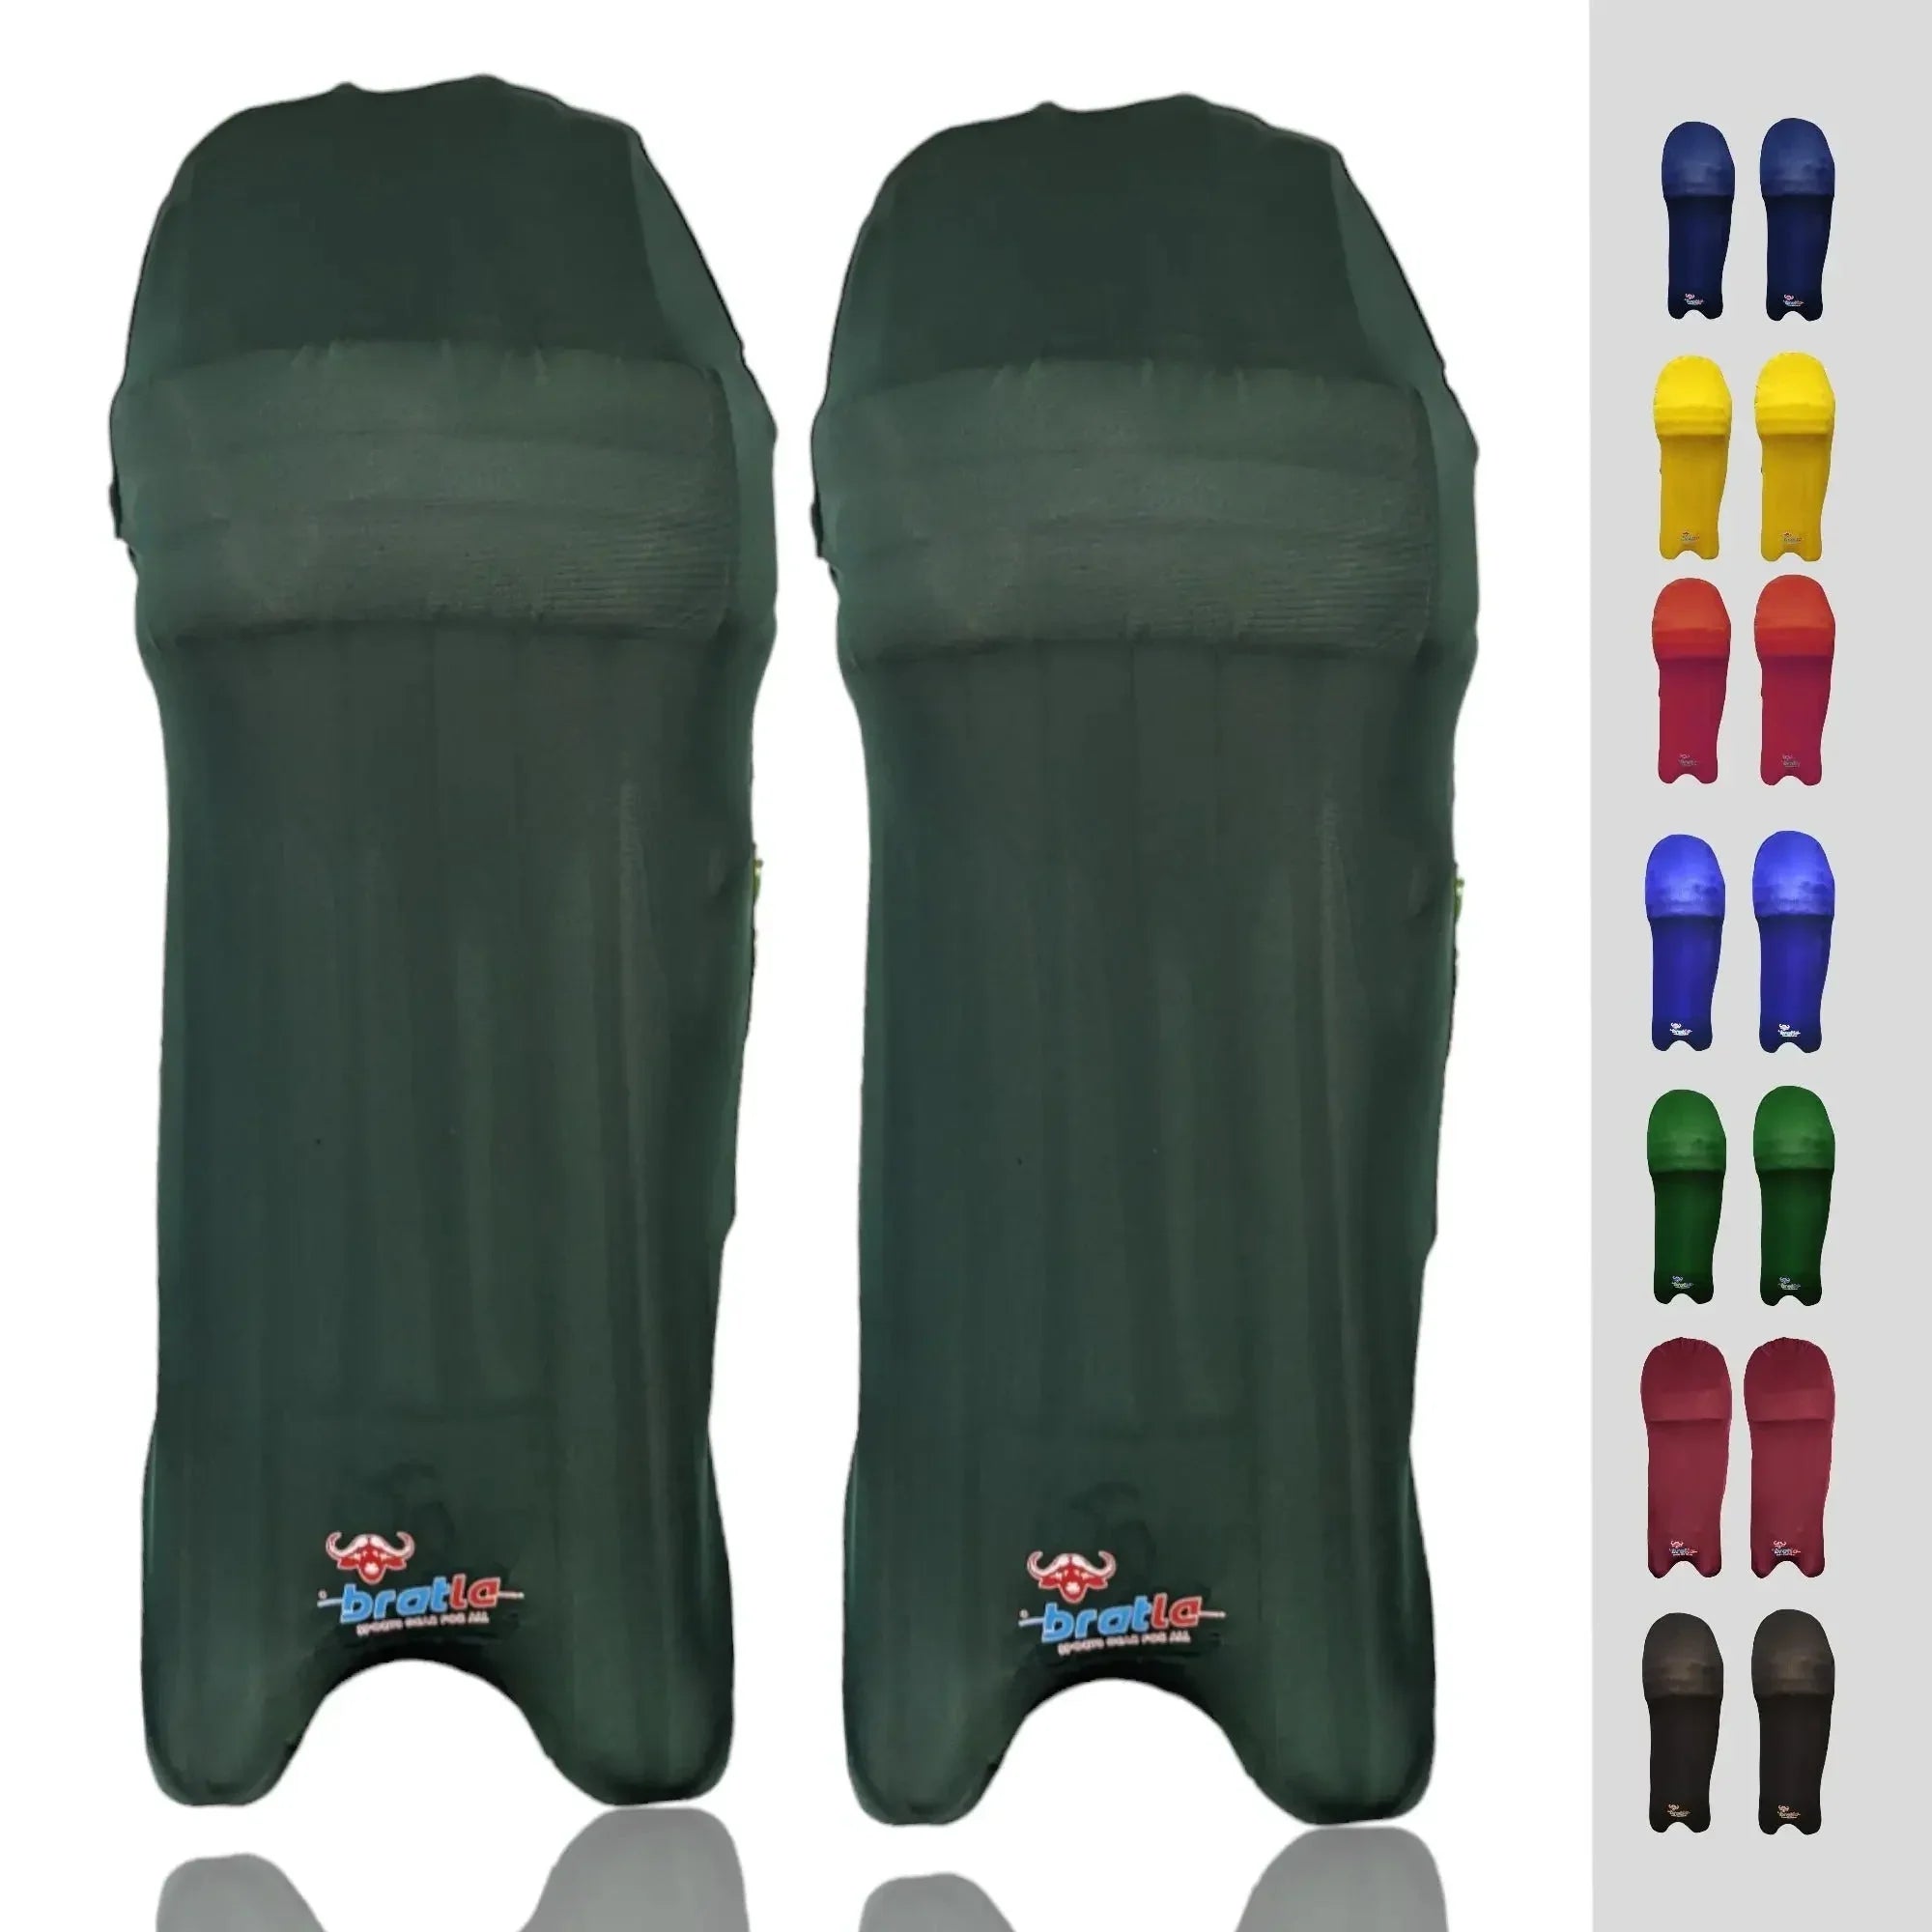 Bratla Cricket Batting Pad Covers Fit Neatly Easily Put On - Green - PADS - BATTING COVER